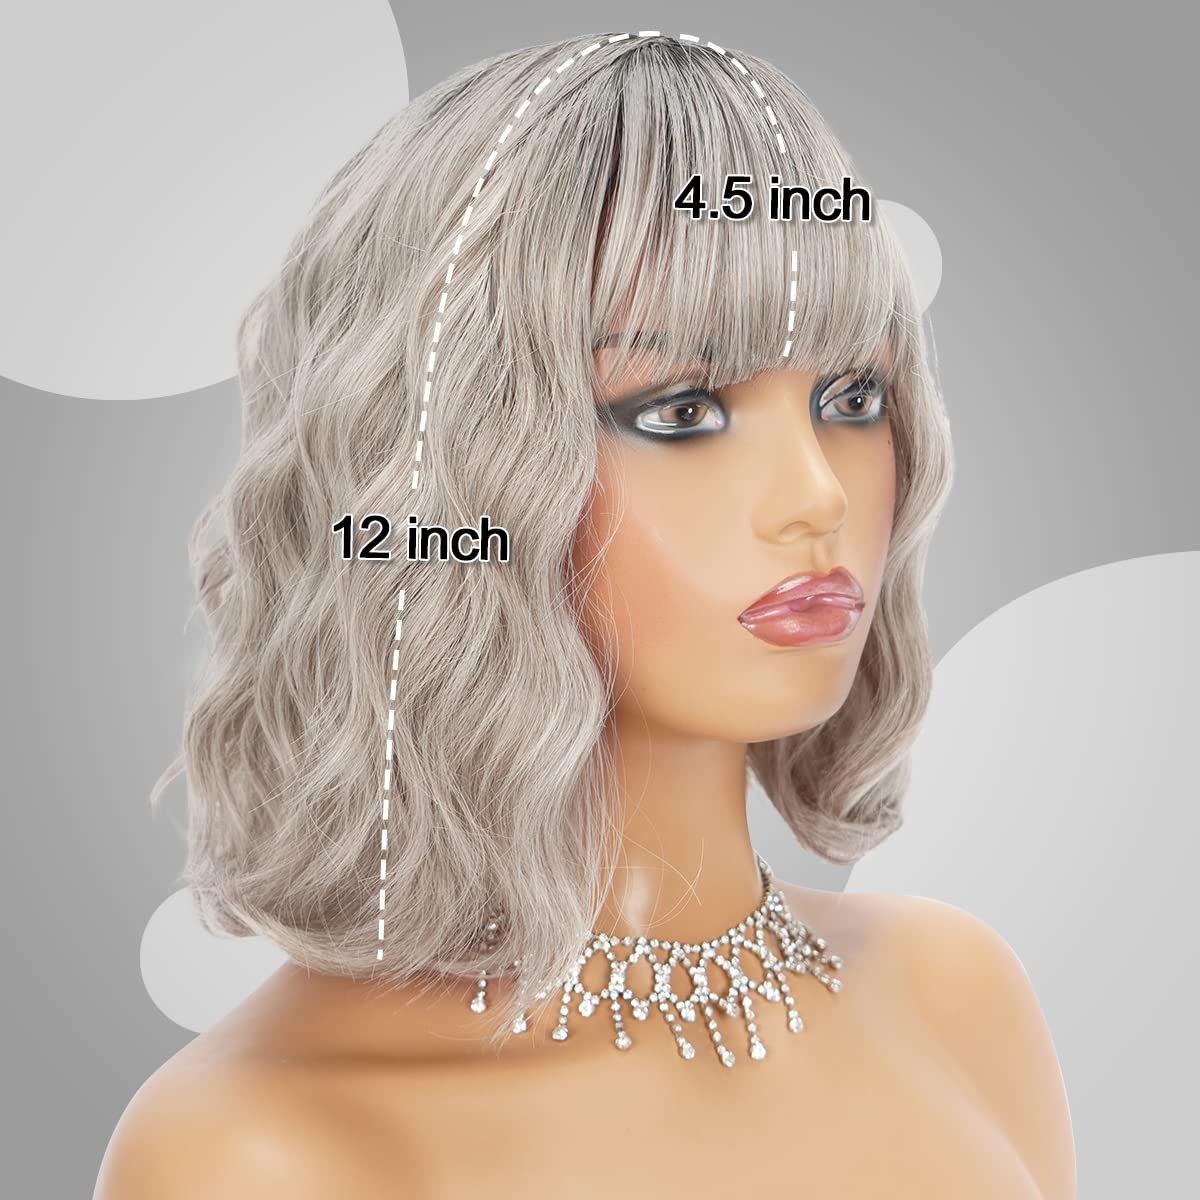 Short Wavy Bob Wig with Bangs Grey Natural Ombre Silver Synthetic Hair Shoulder Length Short Curly Wigs